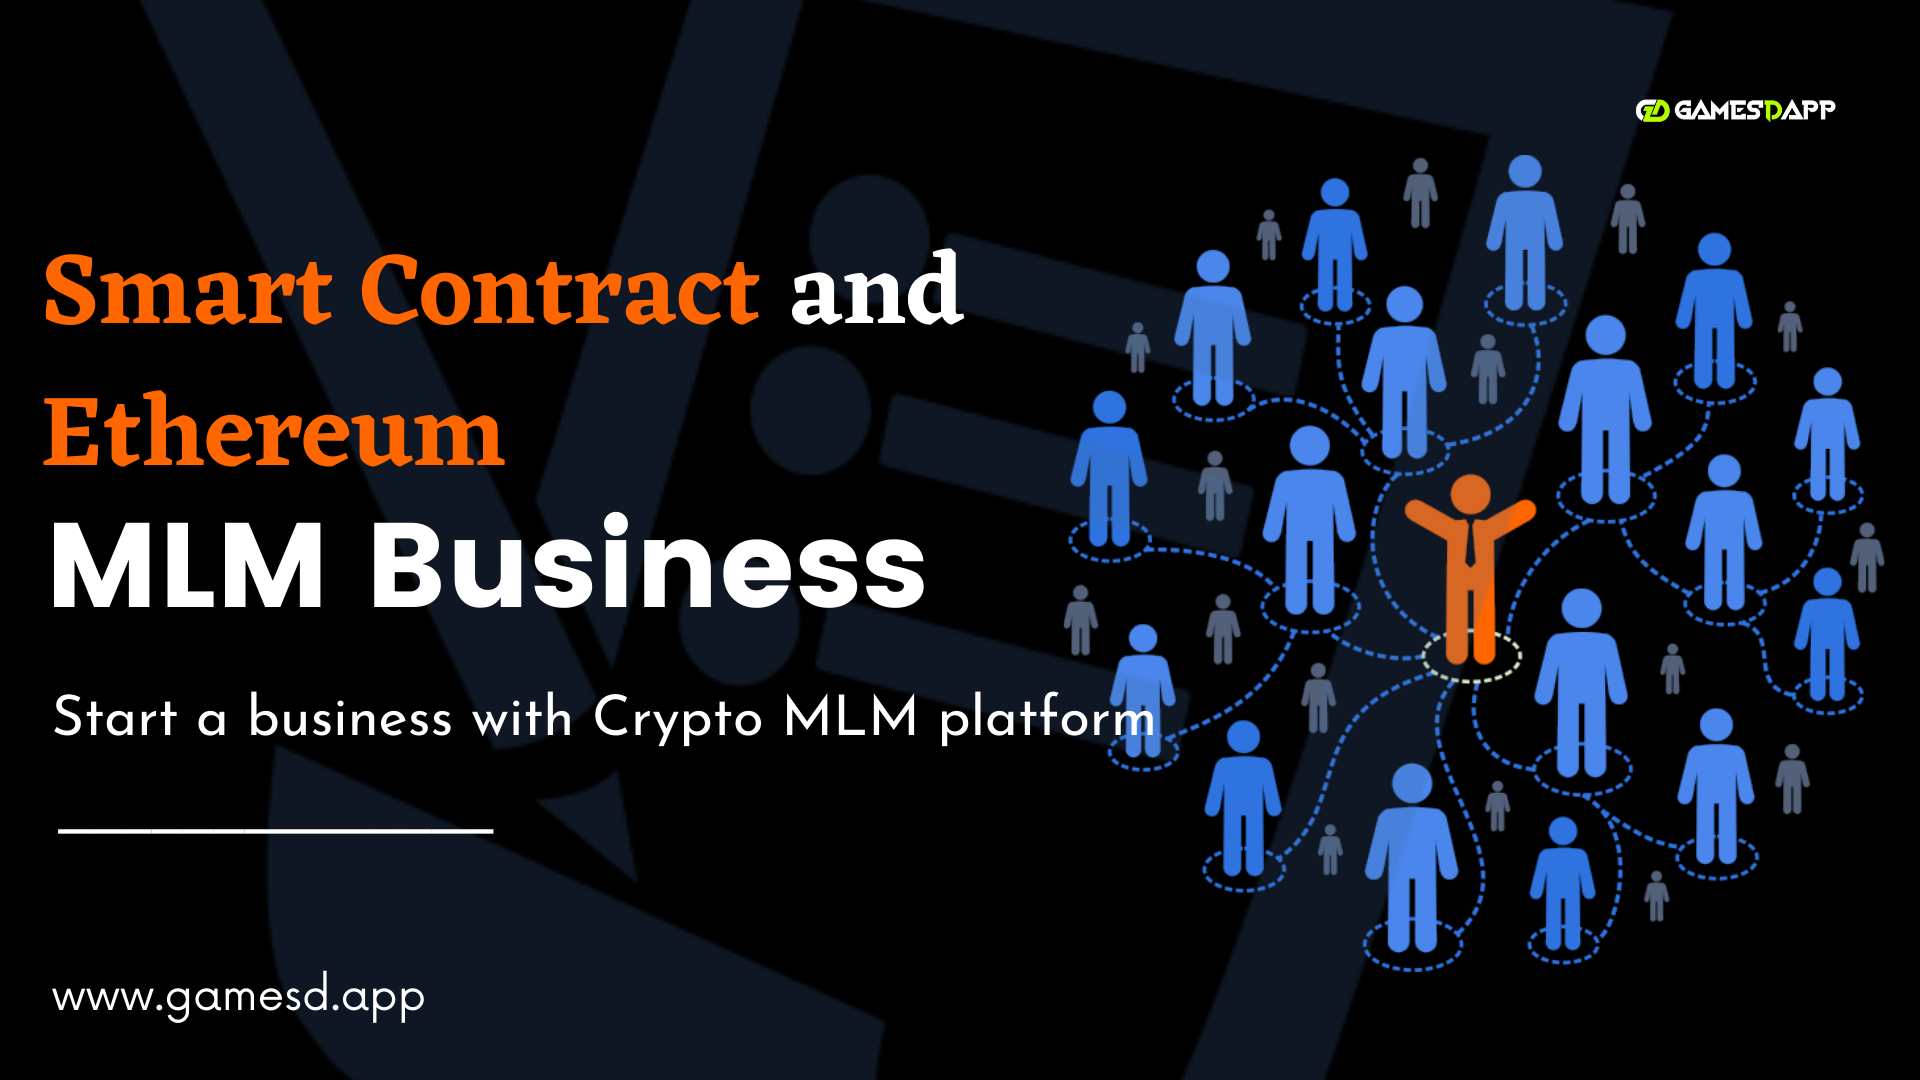 Start your MLM Business with Ethereum Dapp and Smartcontract